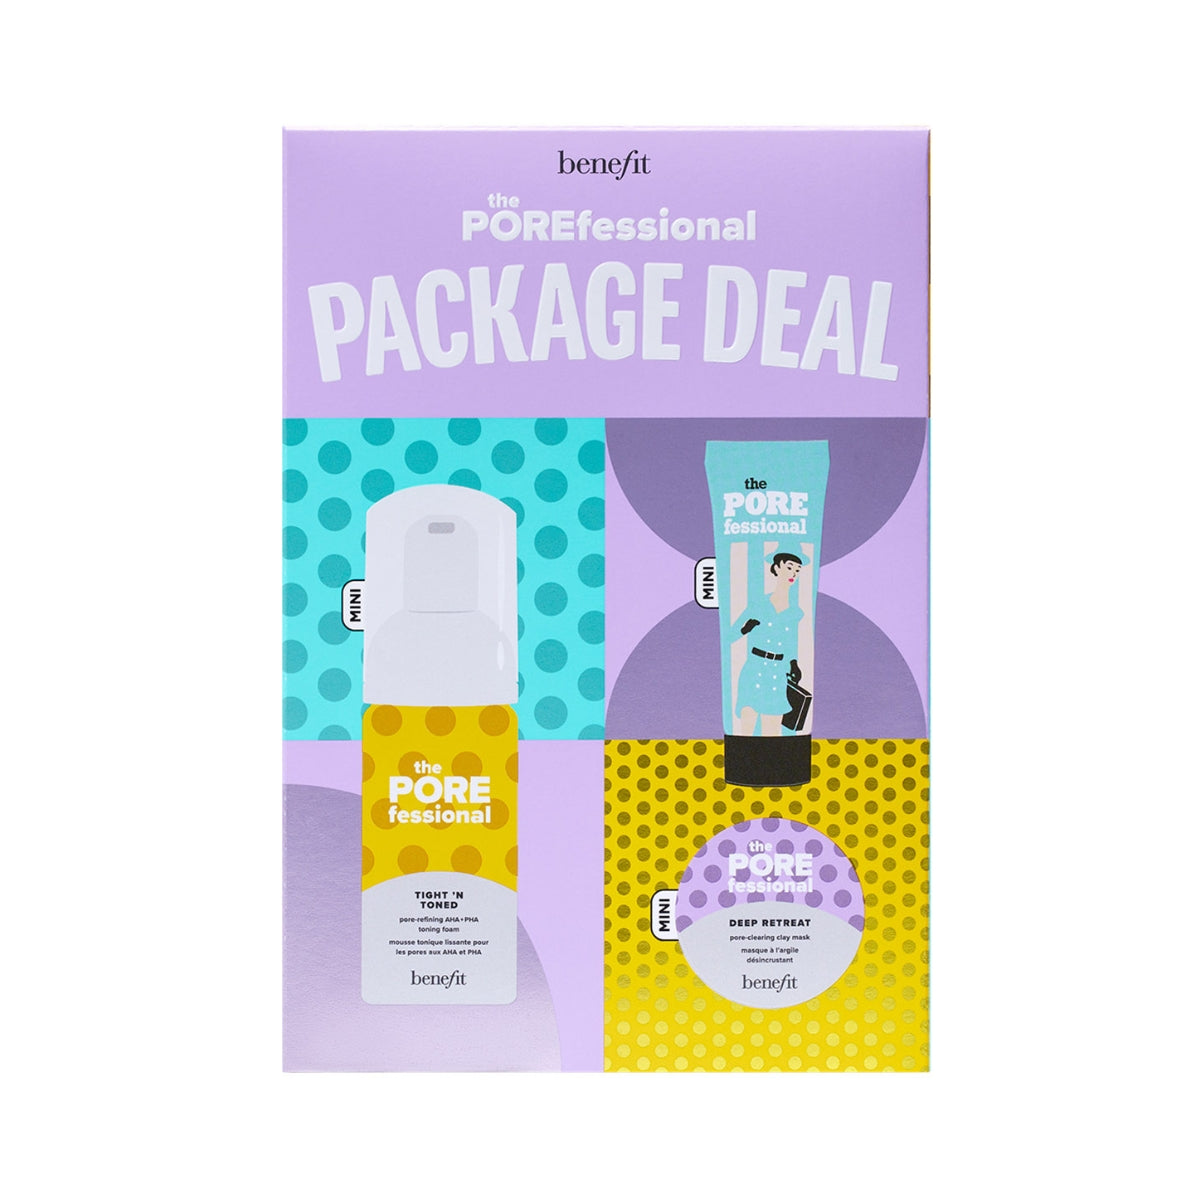 Benefit The Porefessional Package Deal Pore Care Mini Set